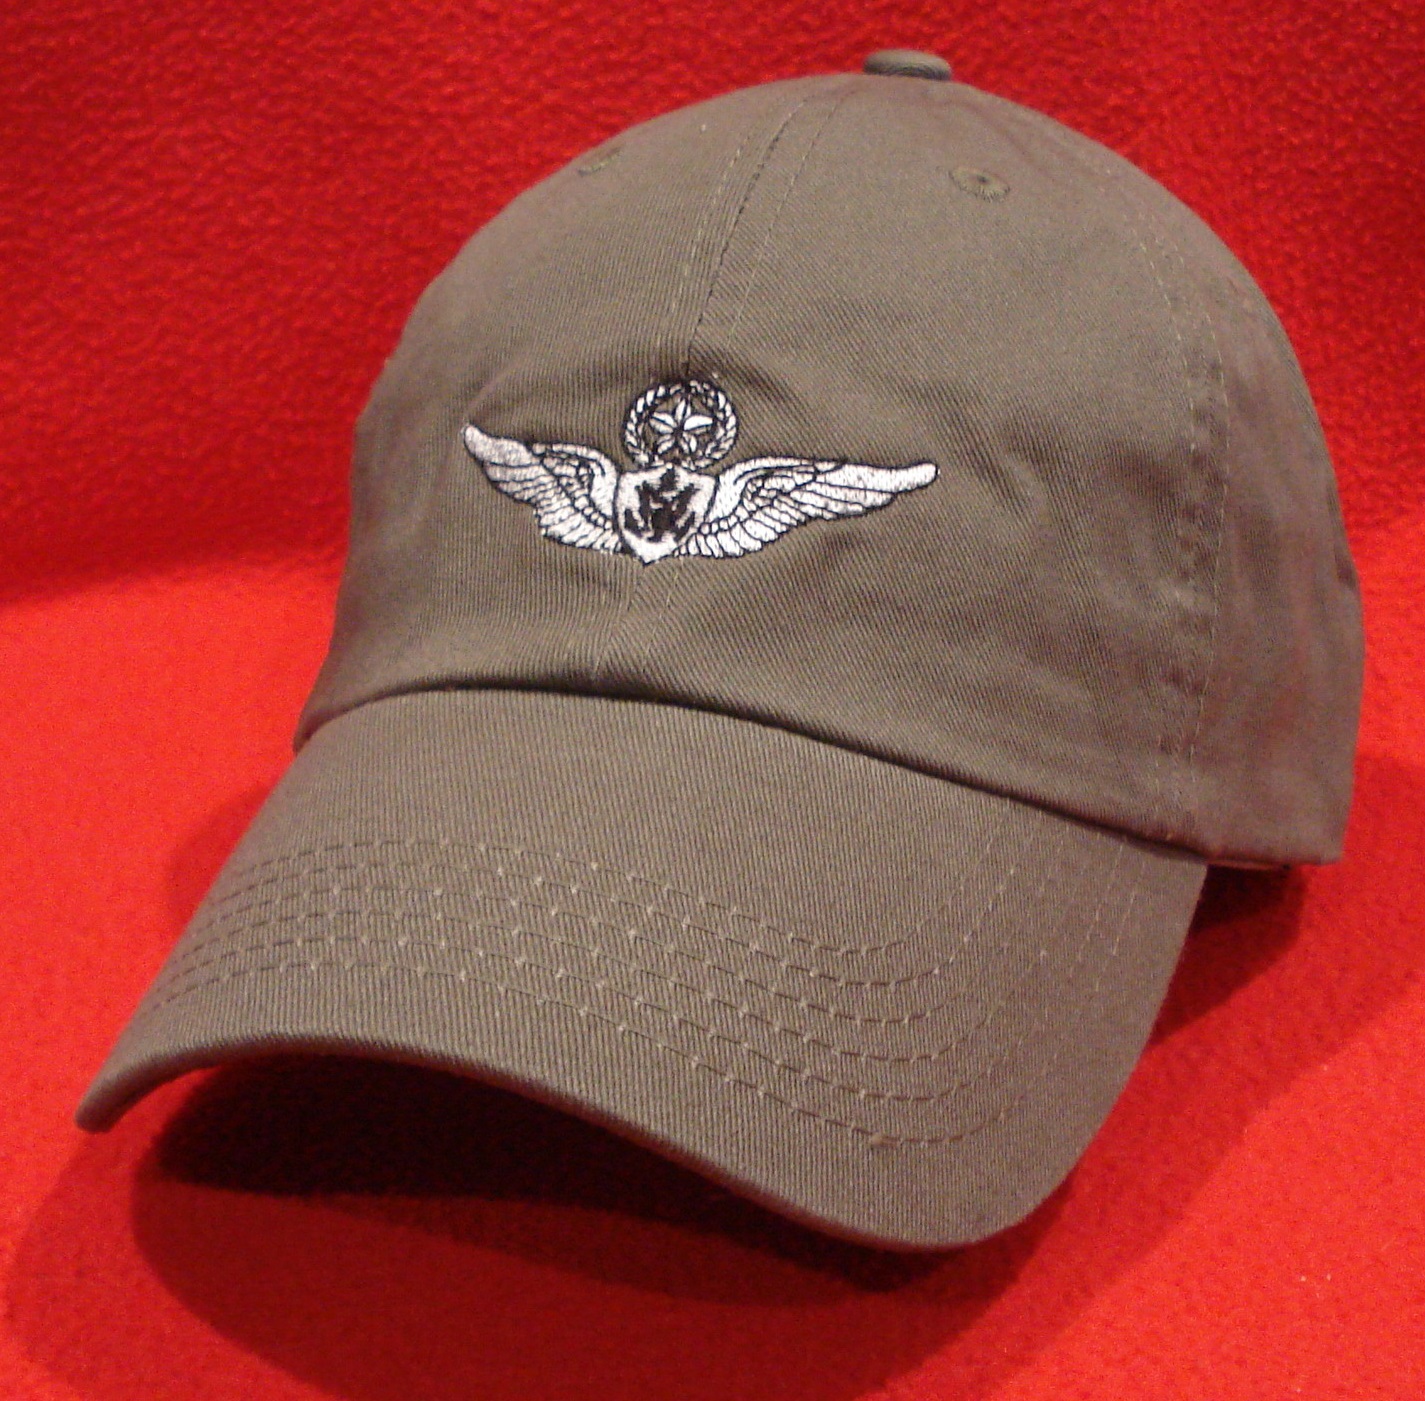 ARMY MASTER AIRCREW Wings Ball Cap STONE/TAN low-profile embroidered hat 